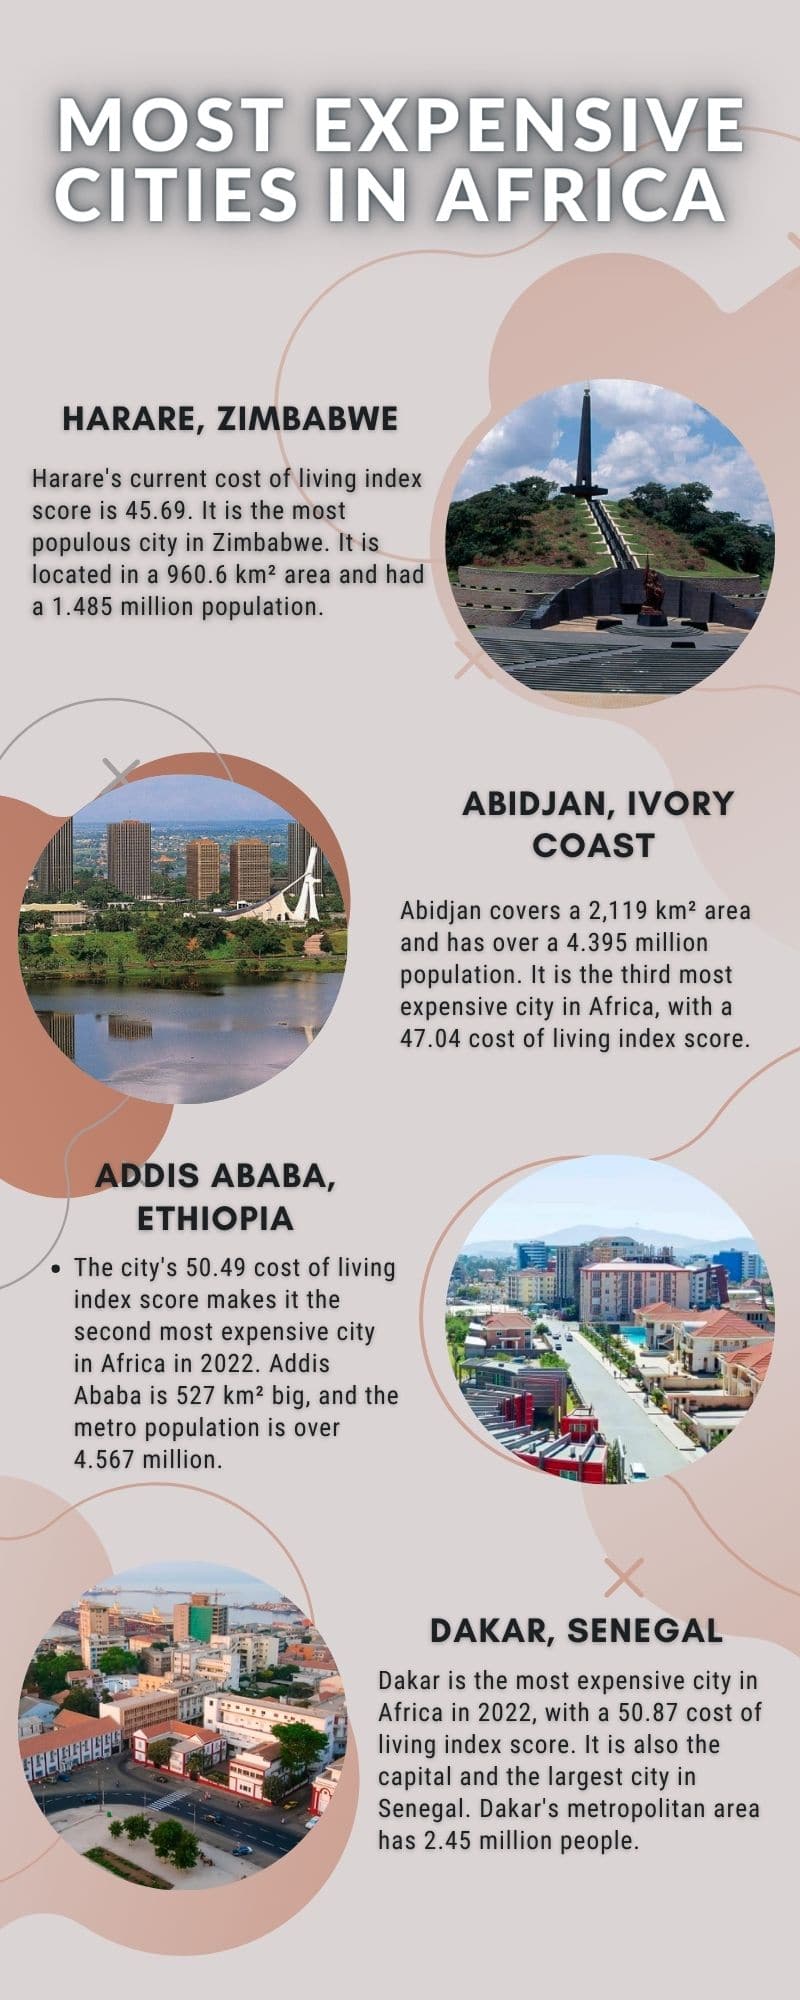 Most expensive cities in Africa